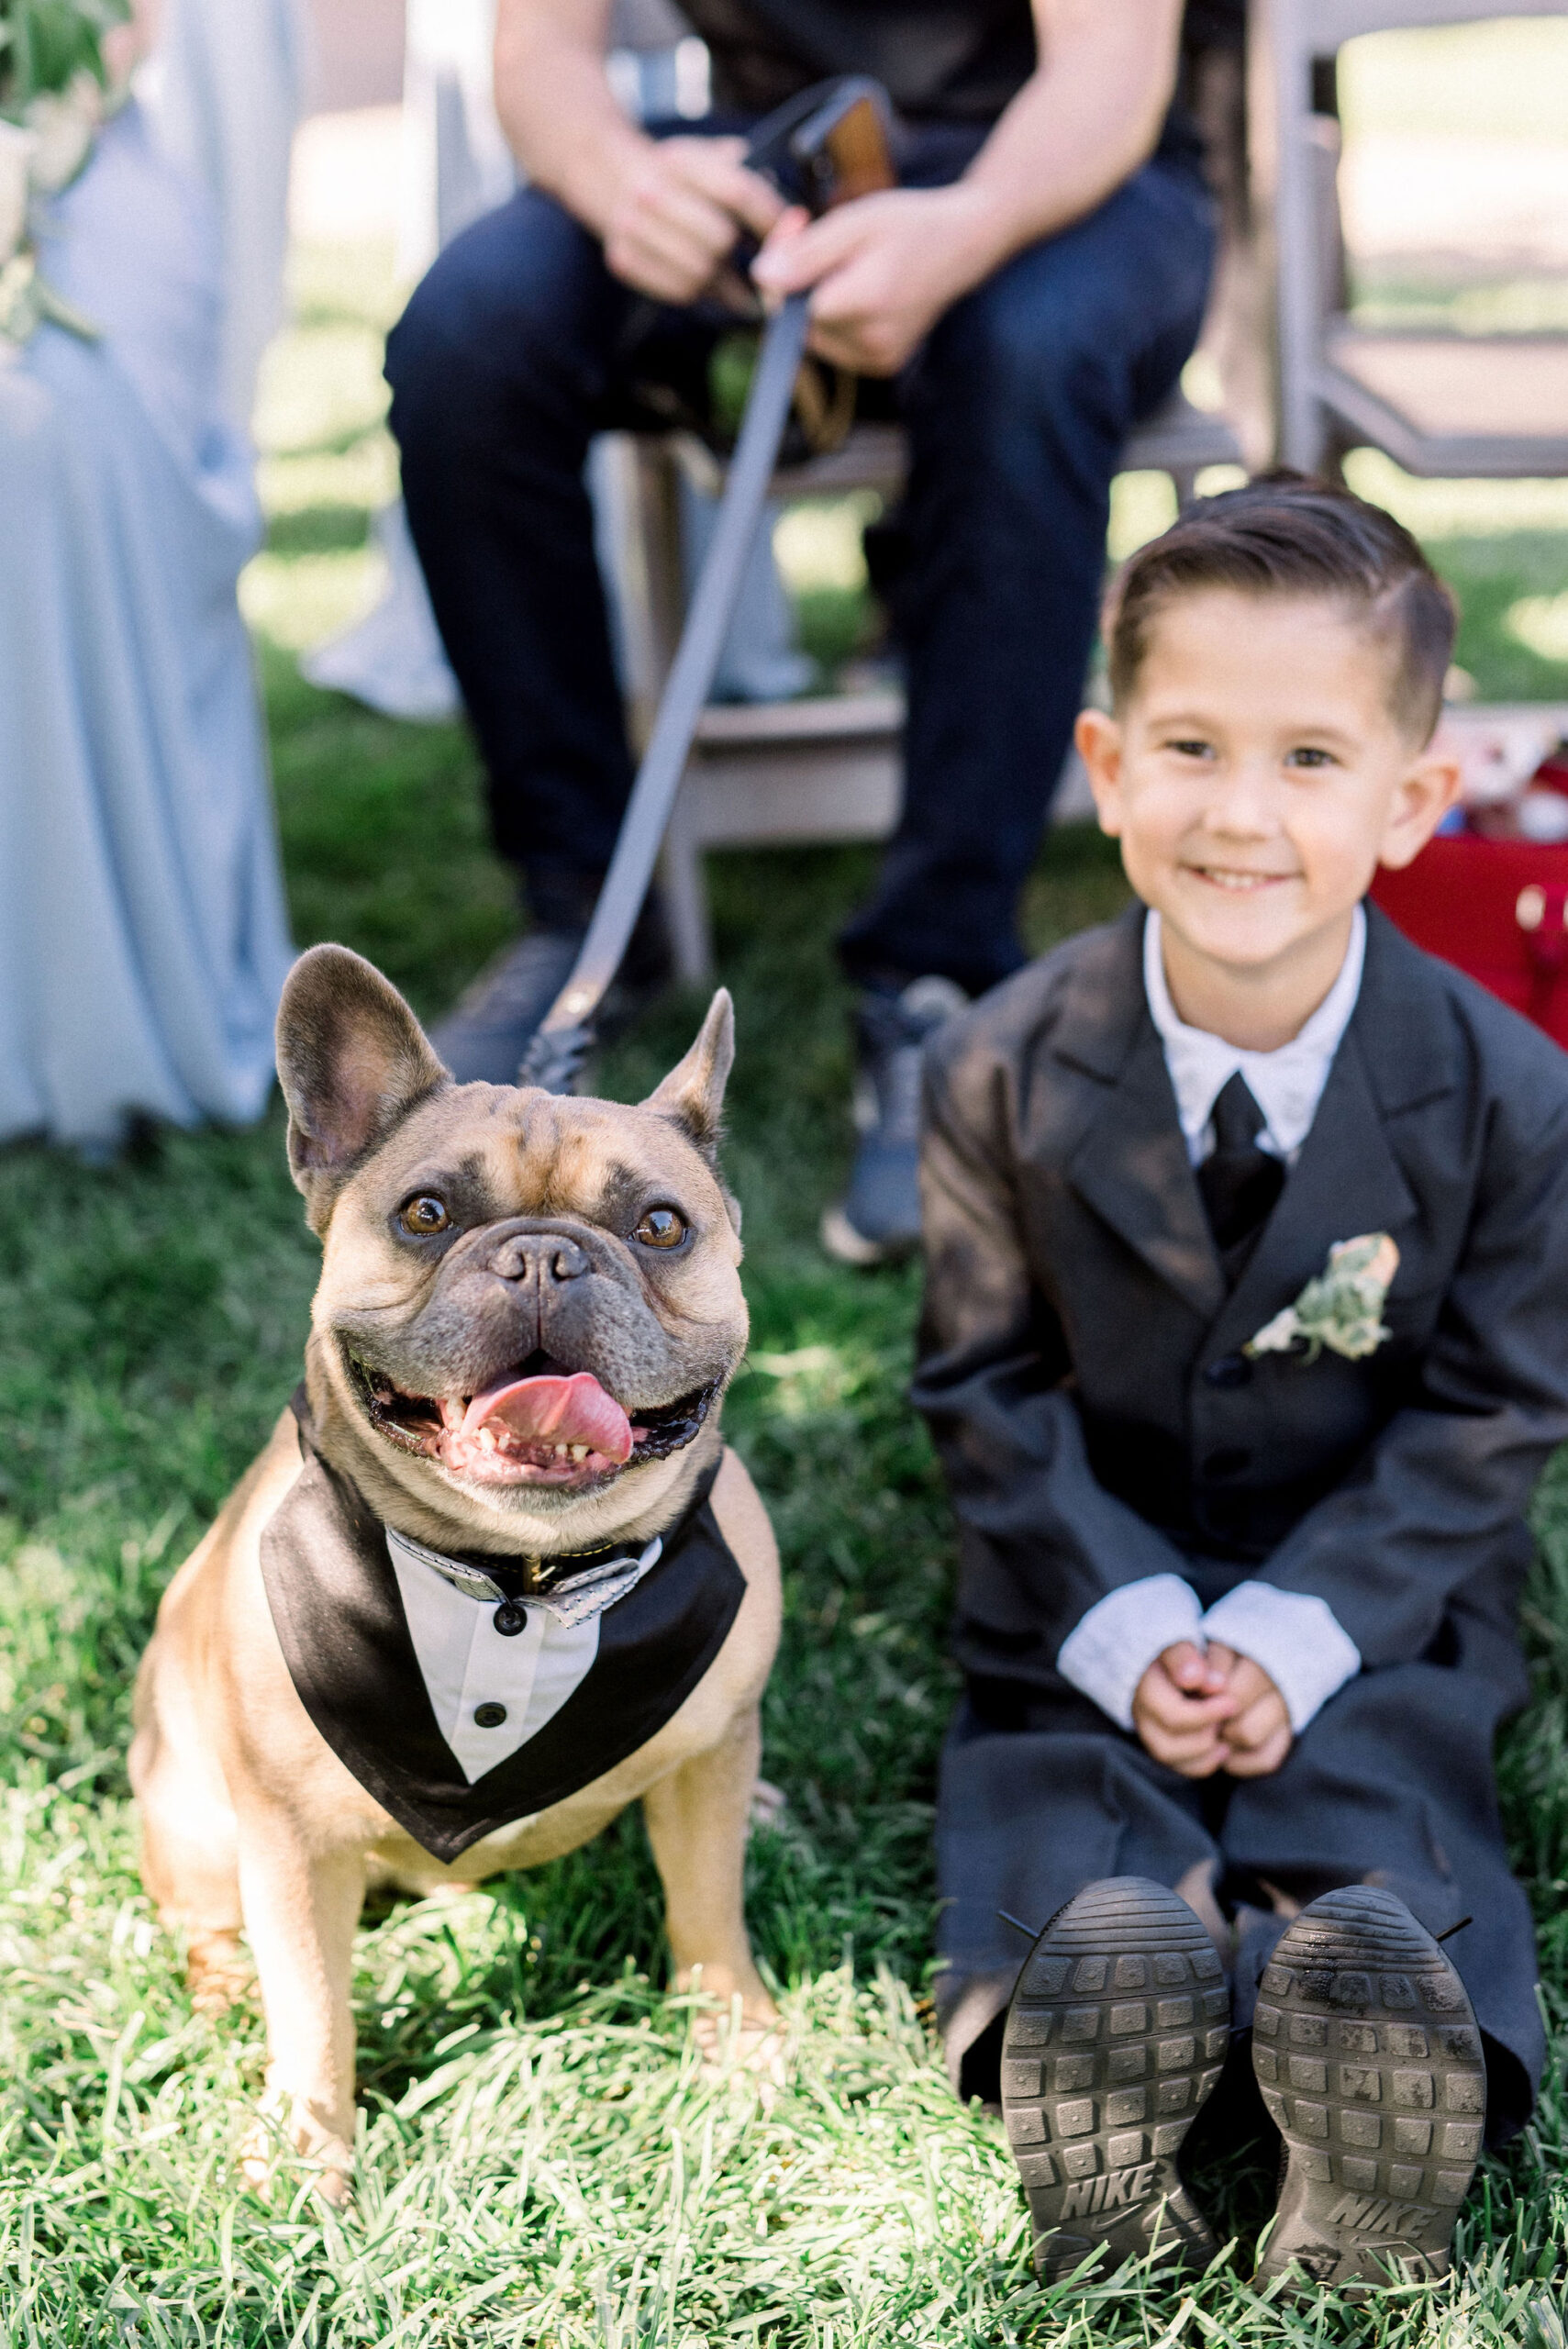 A dog and a ring bearer at a wedding